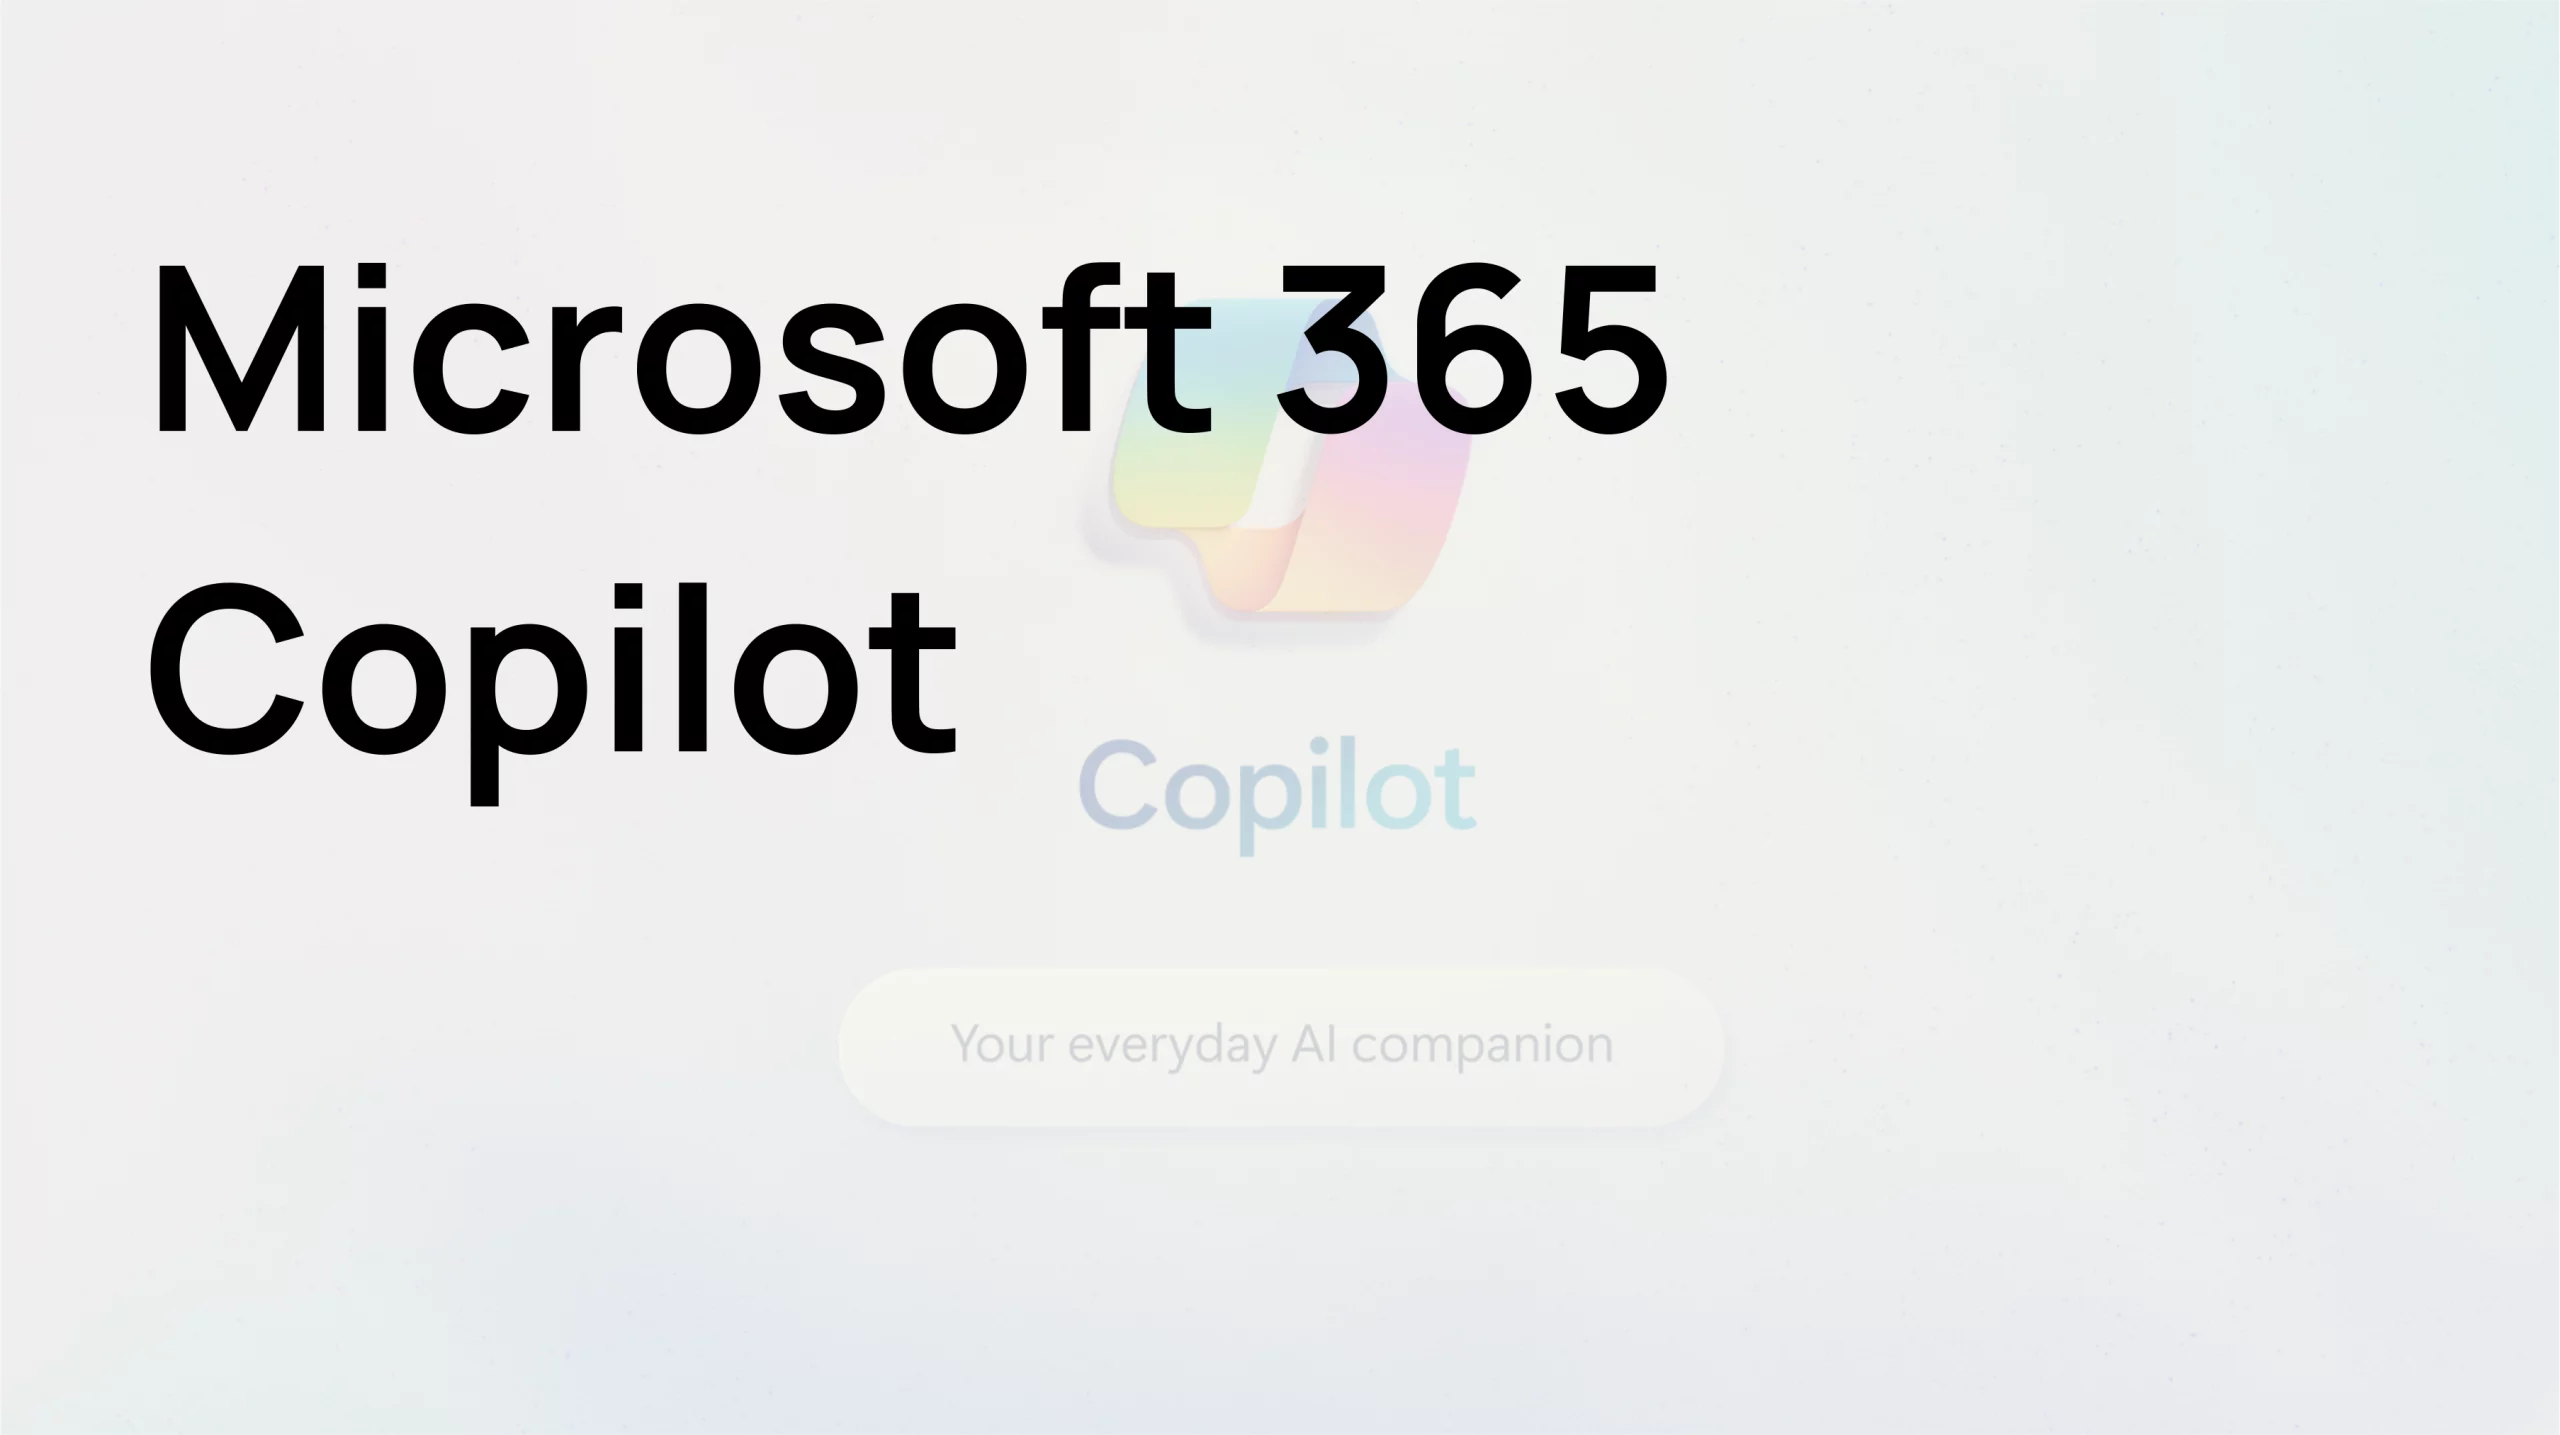 Microsoft Copilot has been meticulously architected to uphold the standards of security, compliance, and privacy. It is integrated into the Microsoft 365 ecosystem.